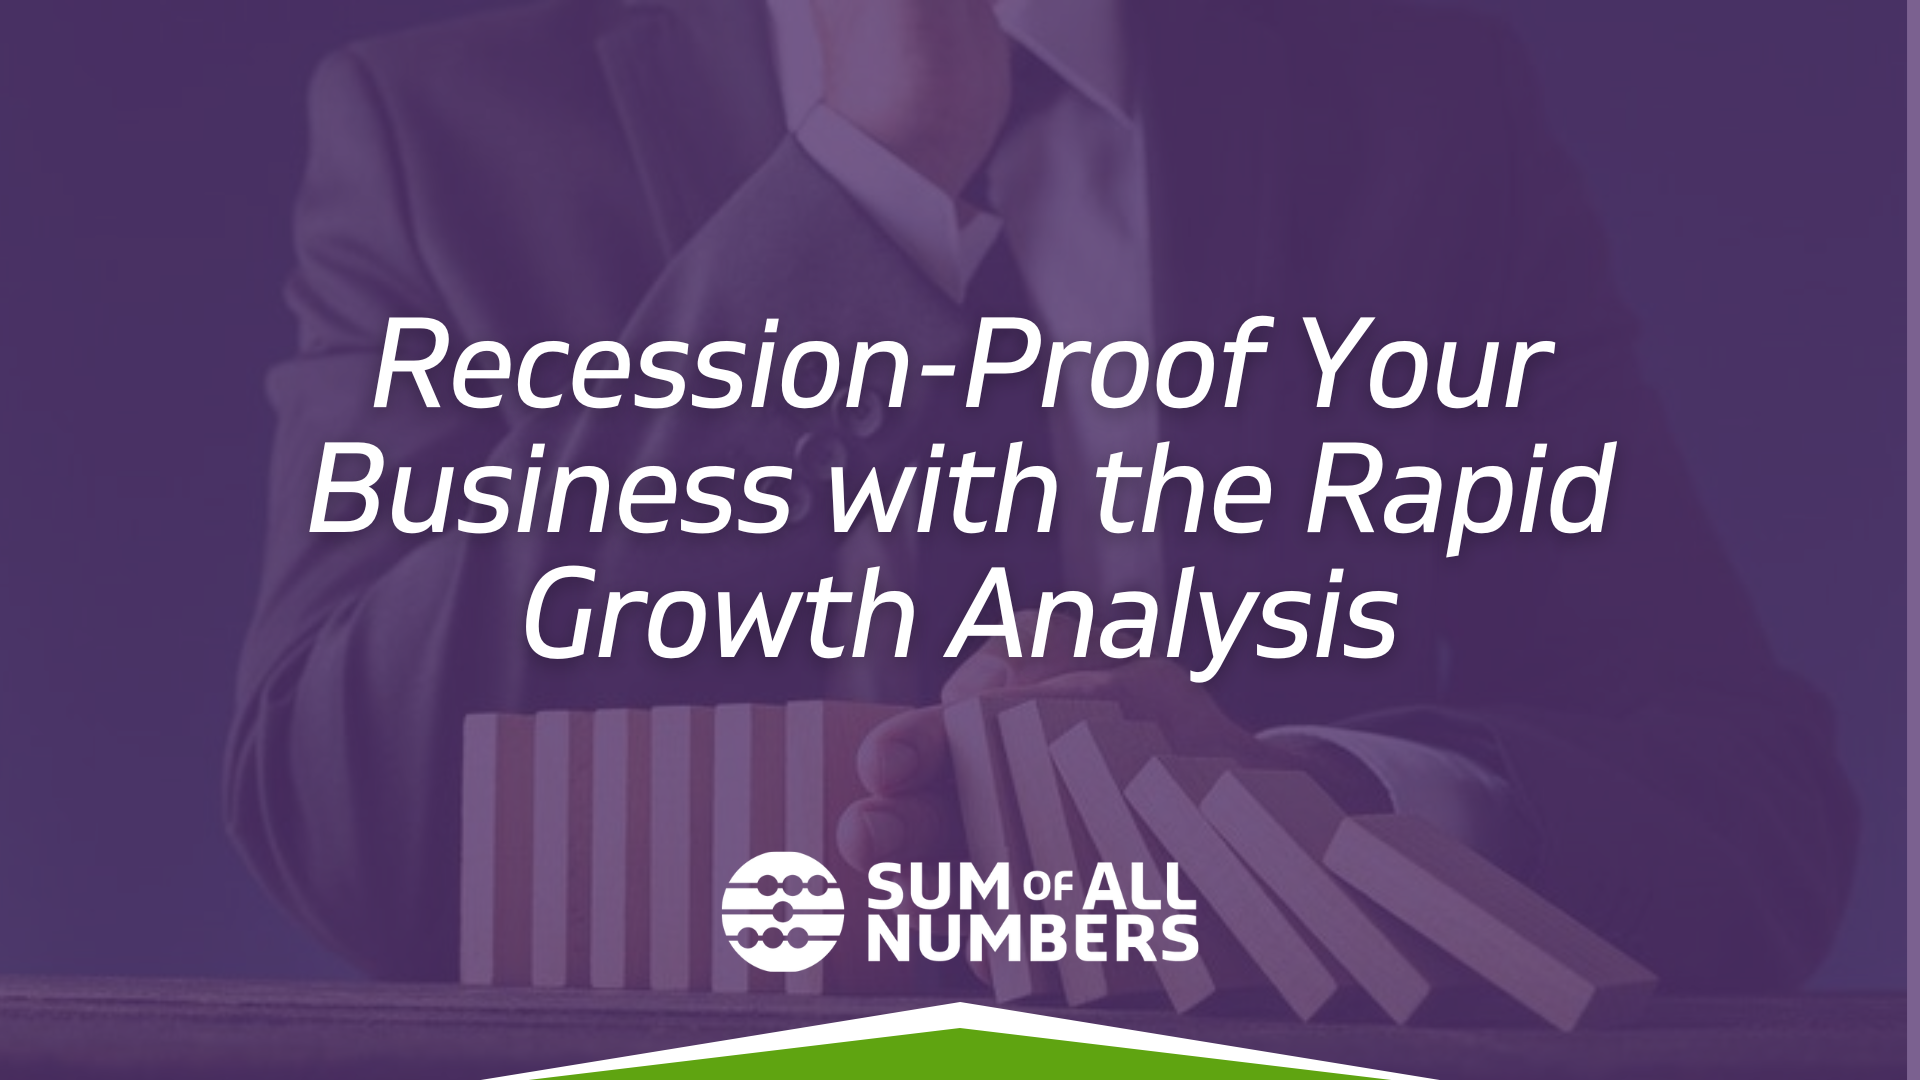 Recession-Proof Your Business with the Rapid Growth Analysis